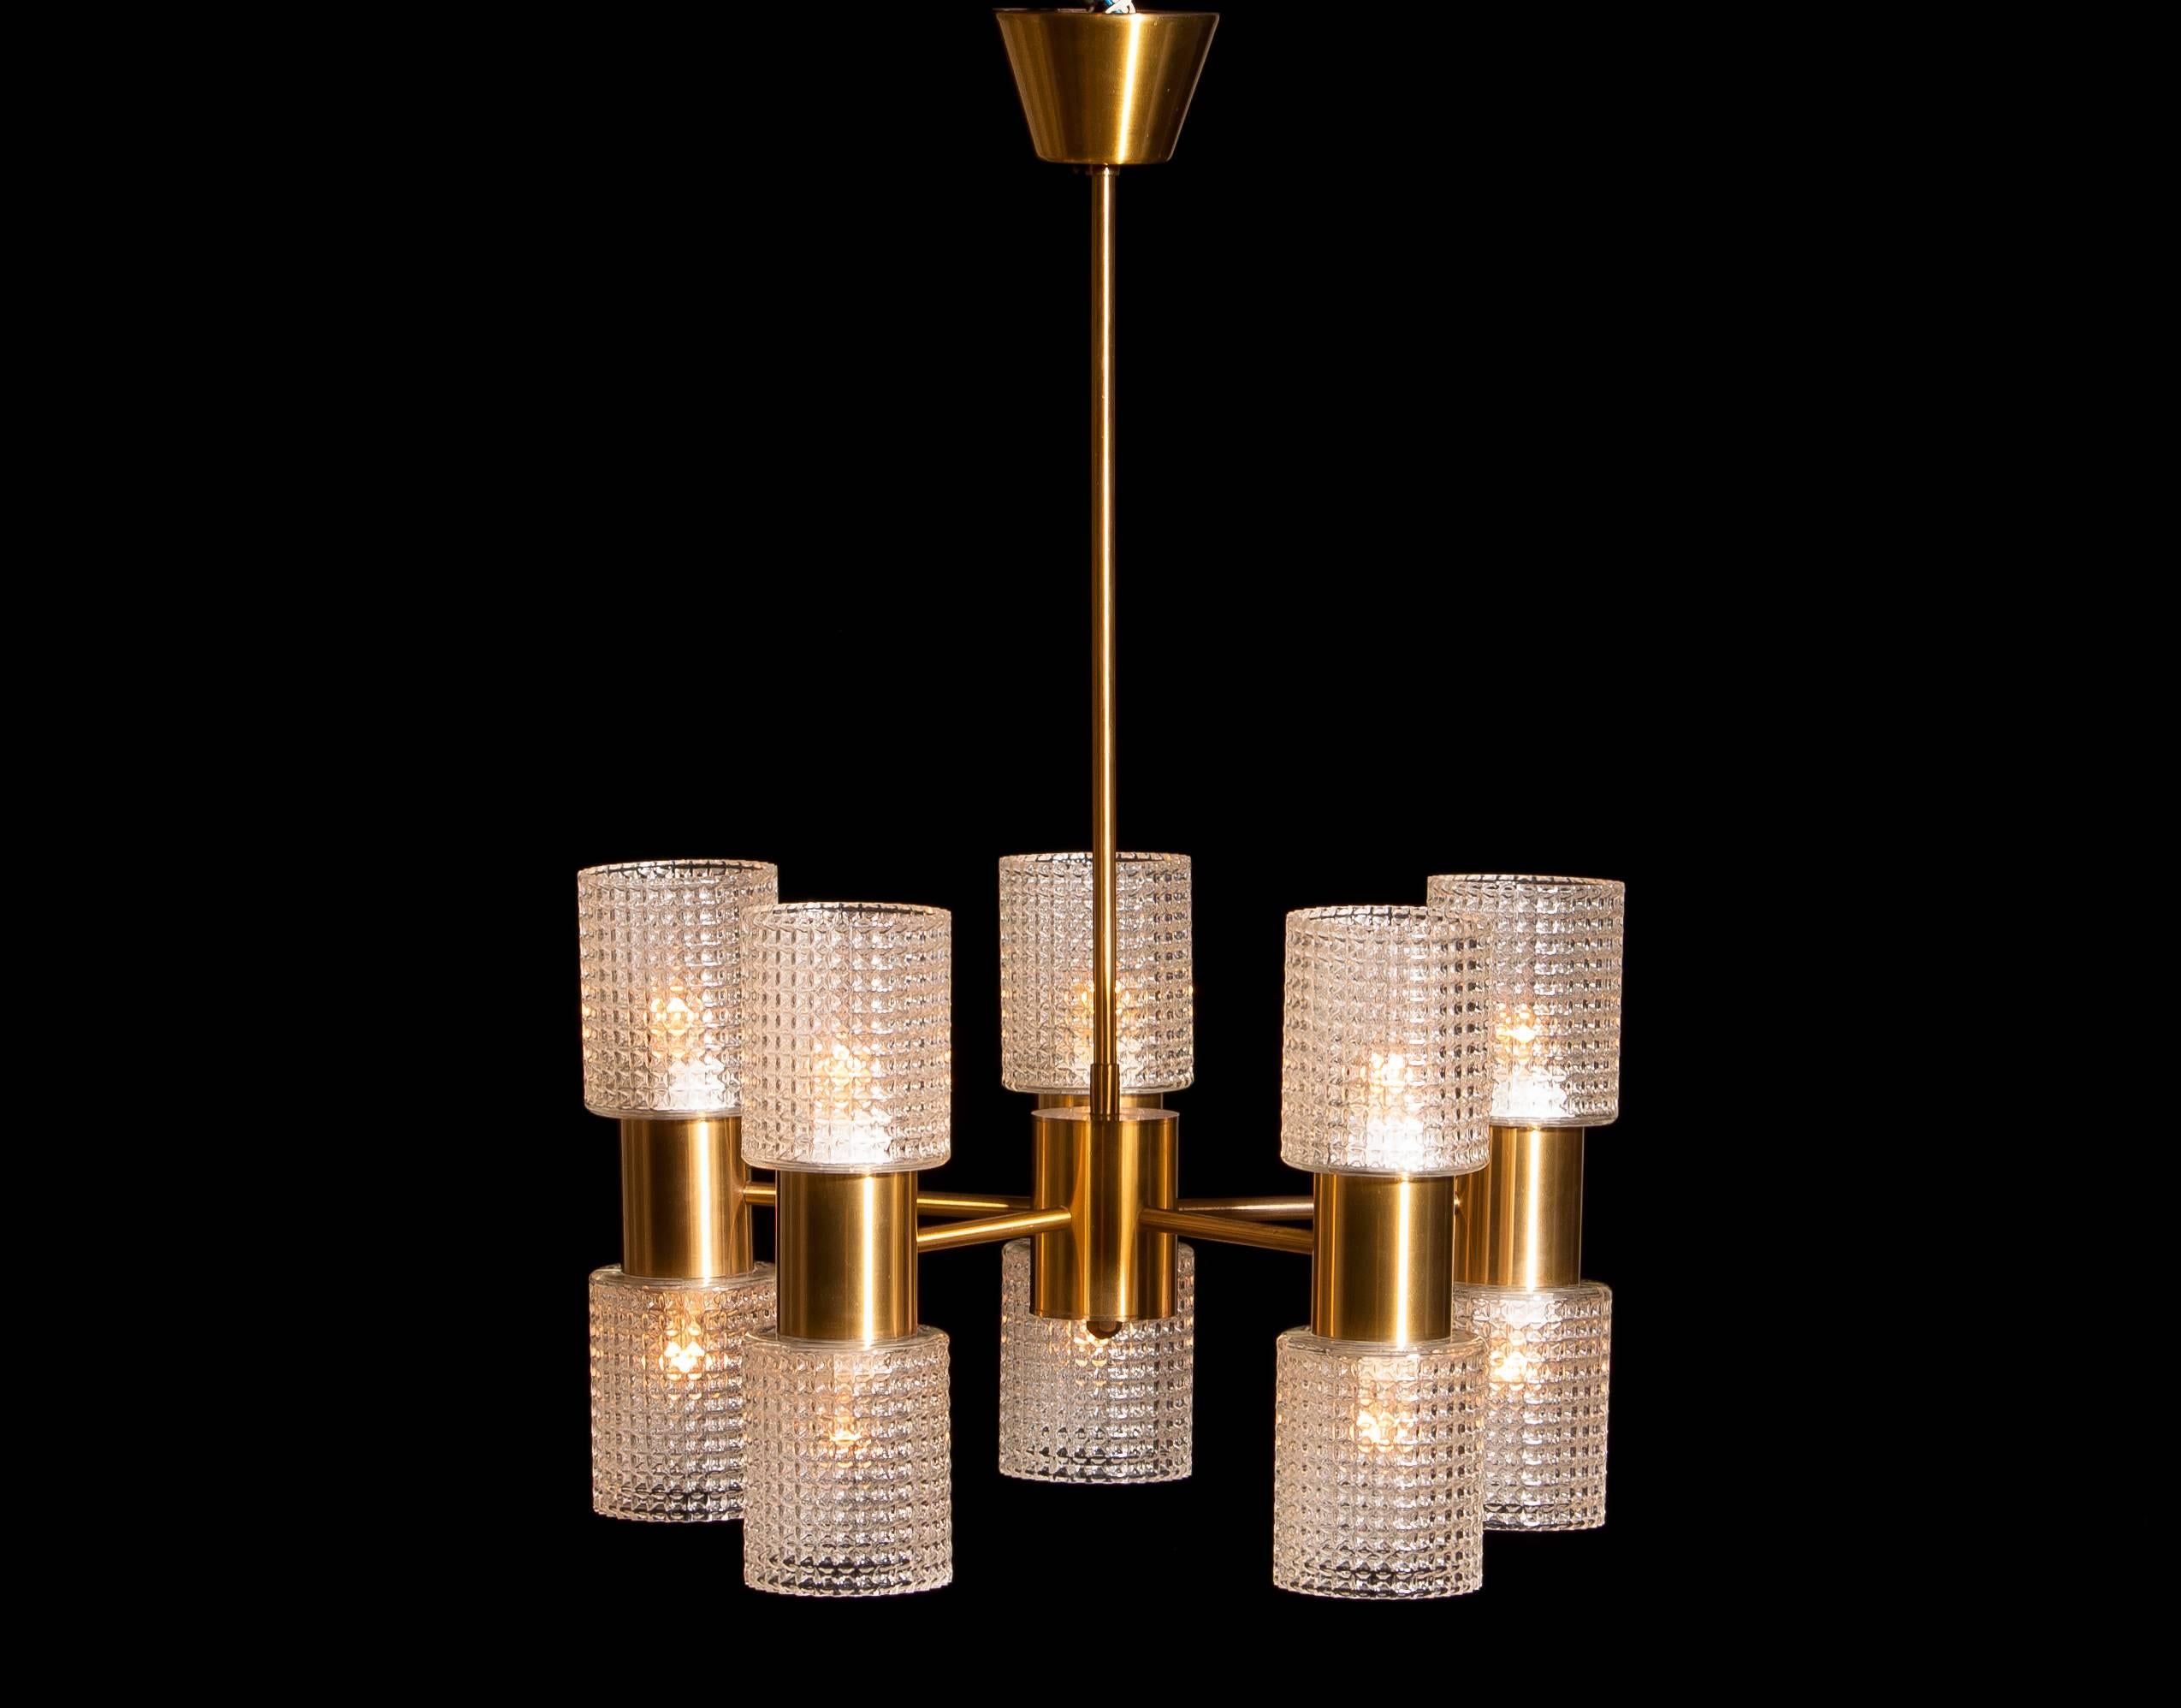 Beautiful chandelier designed by Carl Fagerlund for Orrefors, Sweden.
This lamp is made of brass and glass.
It consists of five arms with on each arm two glass shades.
The upper and the lower row bulbs can be switch on separately of each